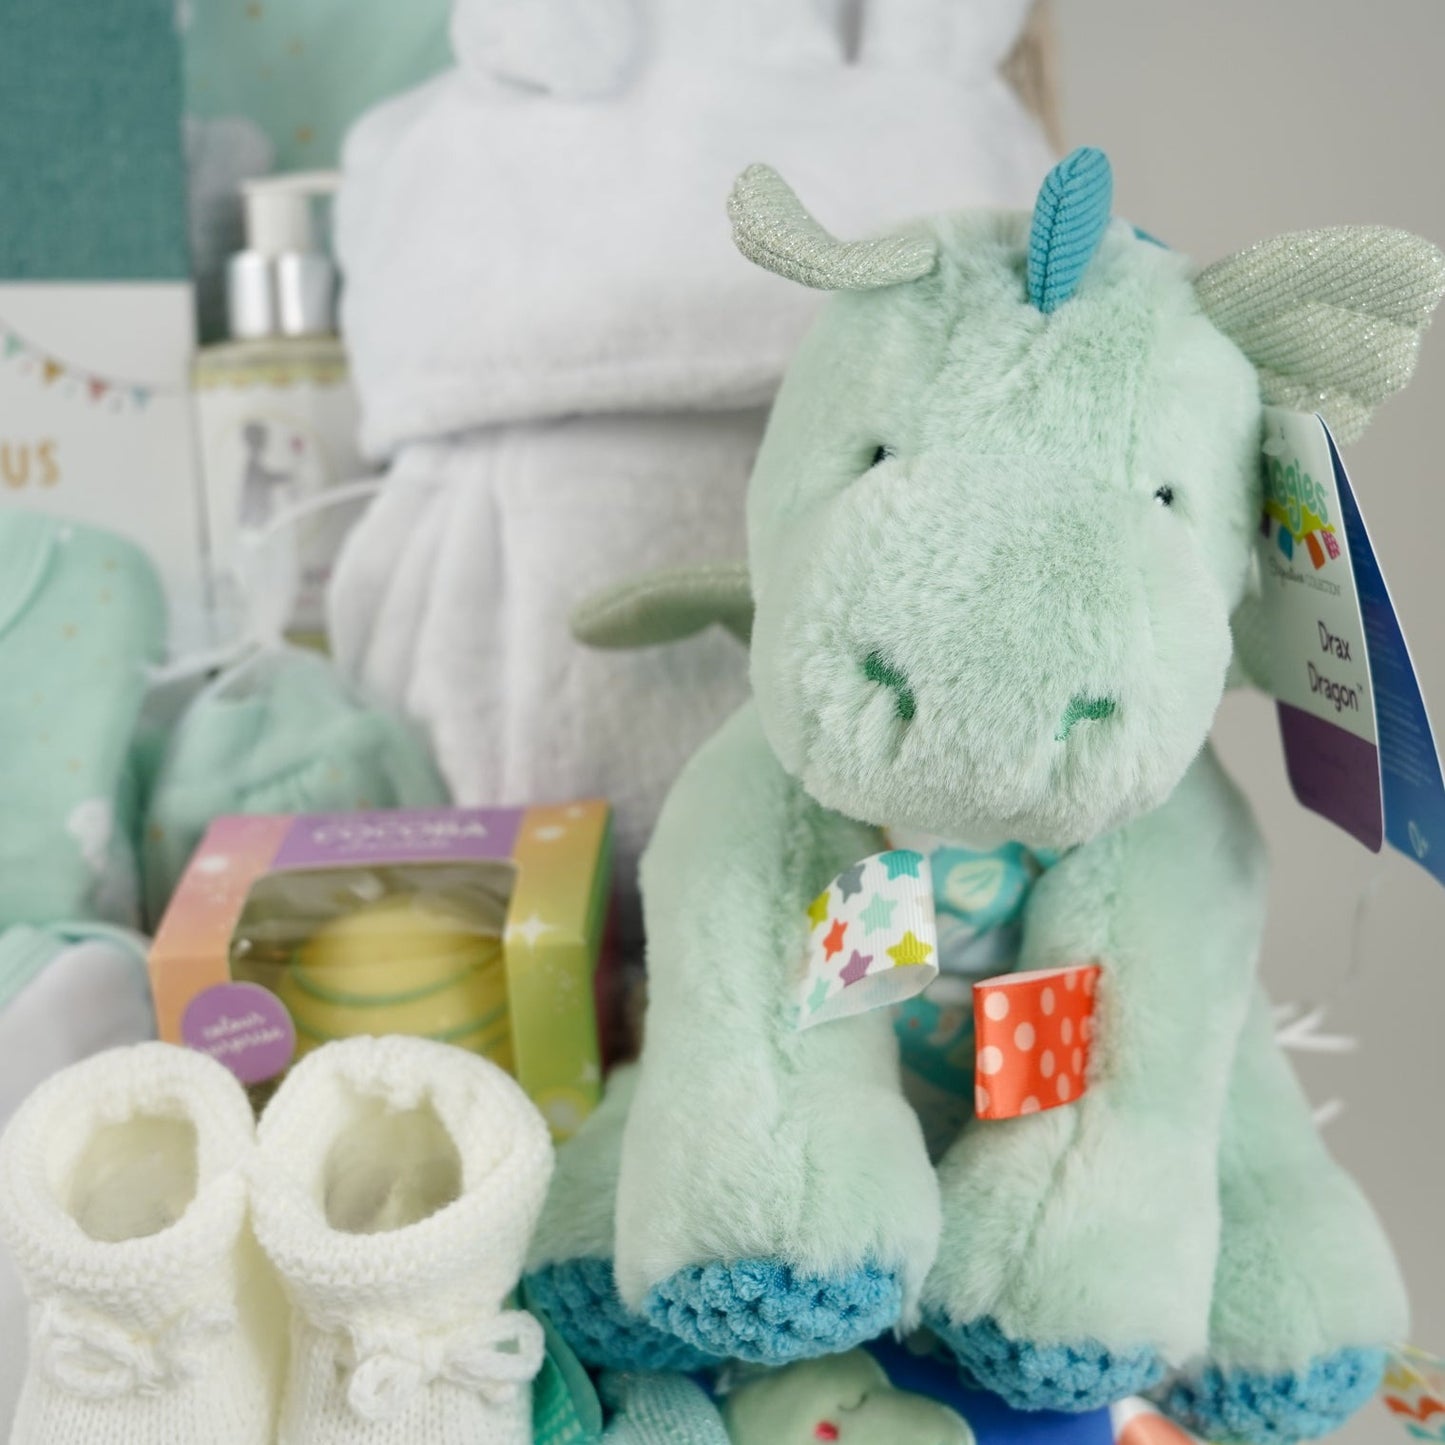 baby hamper basket, baby journal, baby layette outfit in pale mint green with elephants , white baby dressing gown with cute ears, white hot chocolate bomb, baby organic bubble bath, Dragon taggie in green and matching taggie book , white knit booties